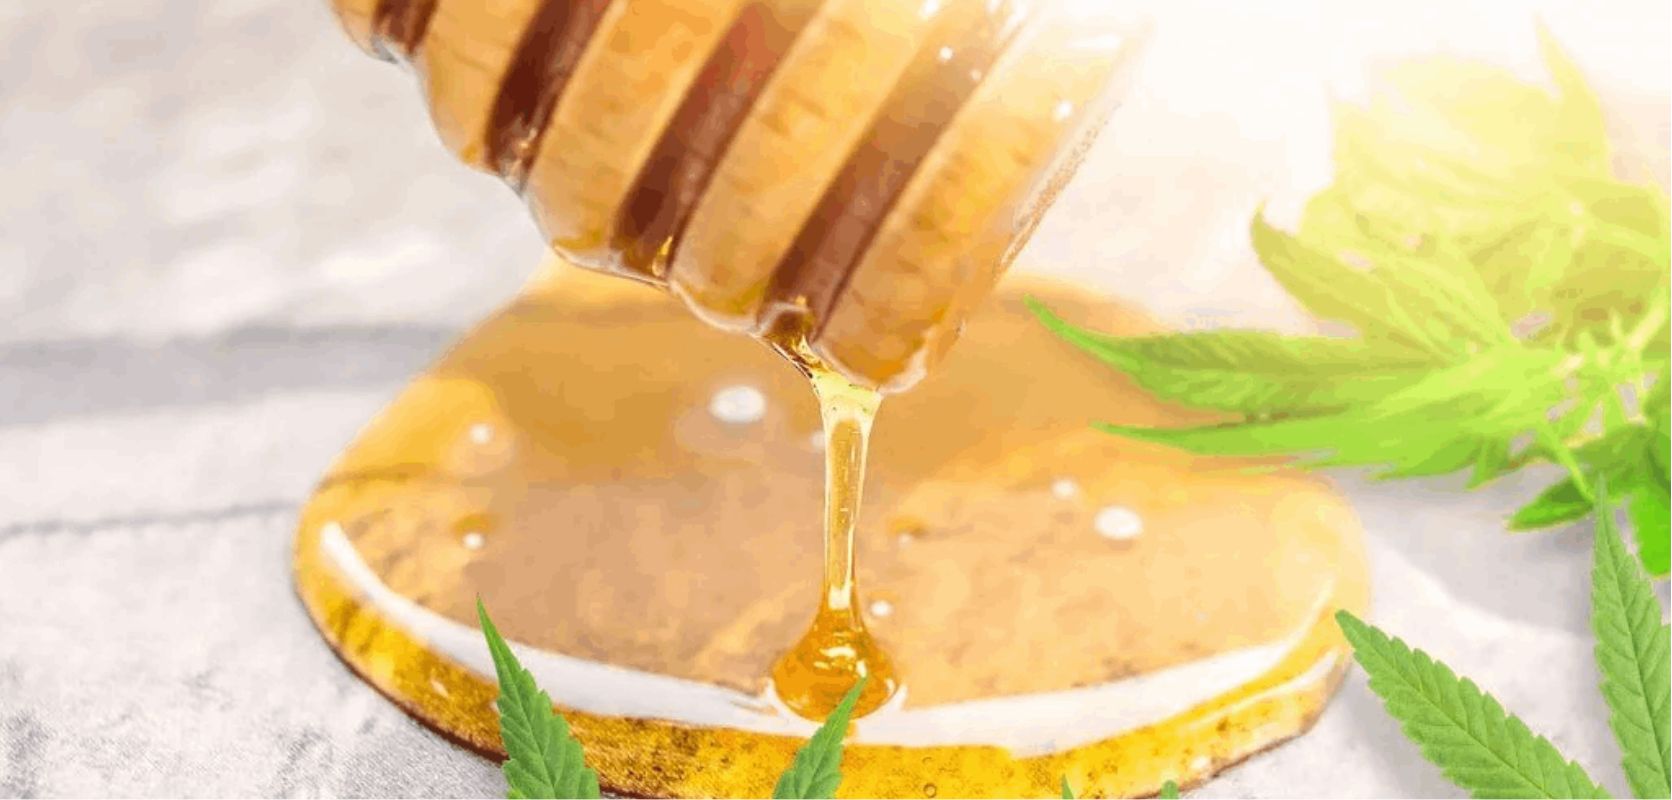 Before kicking off this article about honey with THC and featuring the best products you can get from an online dispensary in Canada.